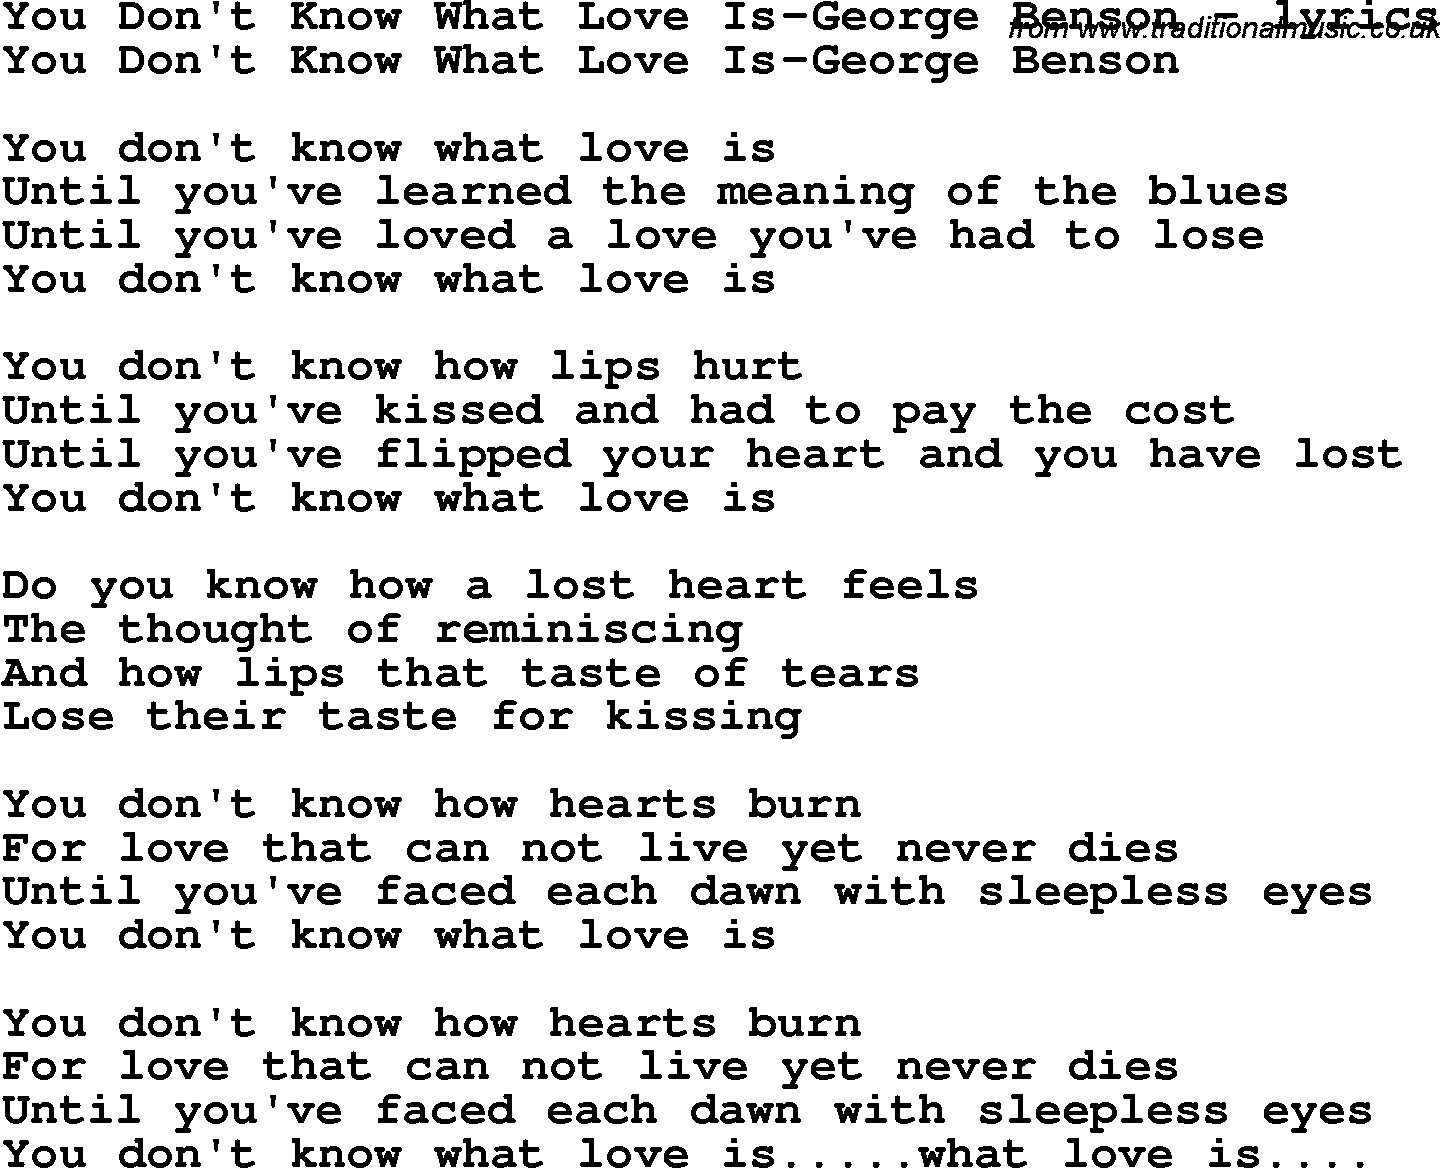 Love Song Lyrics for: You Don't Know What Love Is-George Benson